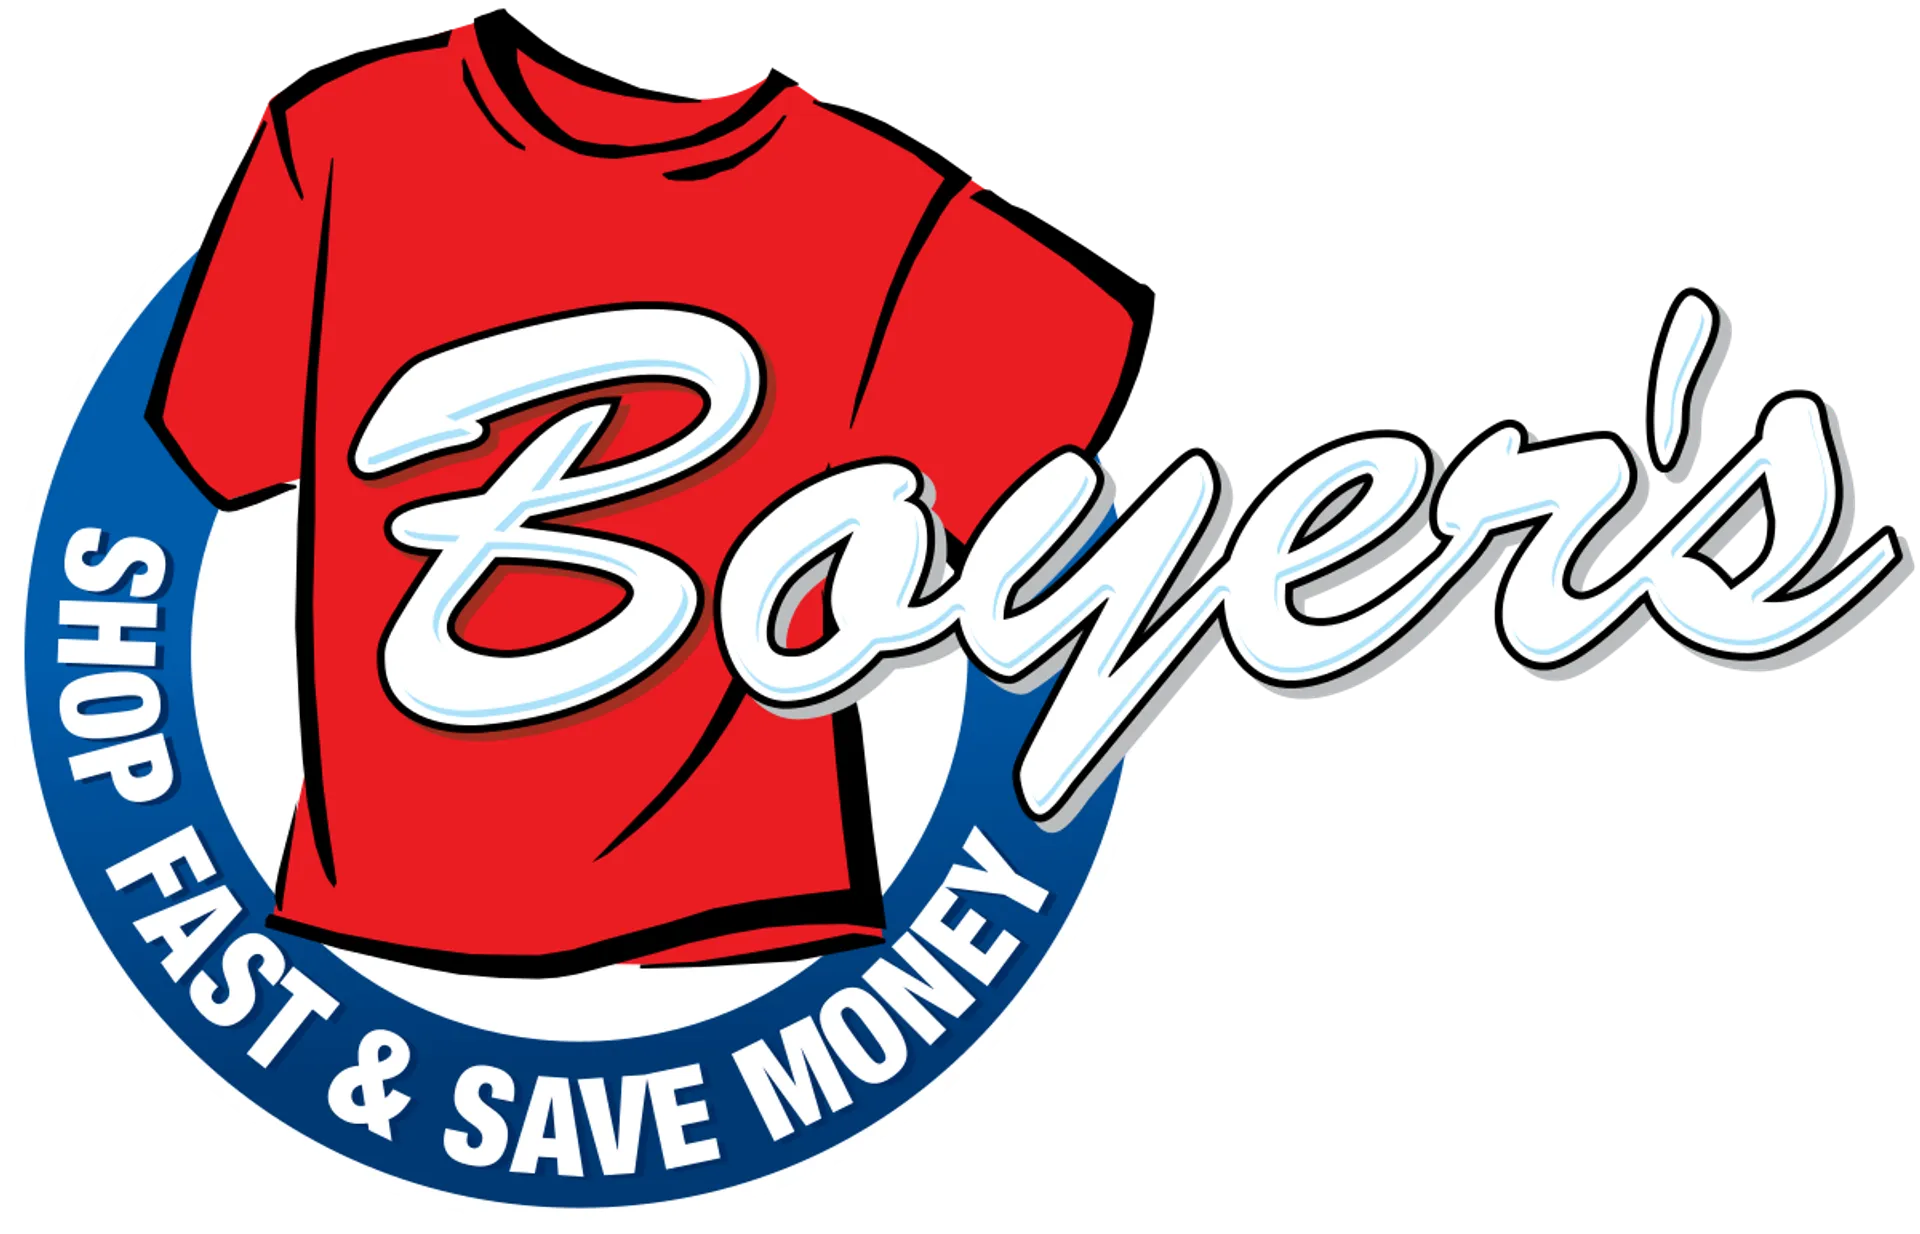 BOYER’S FOOD MARKET logo. Current weekly ad